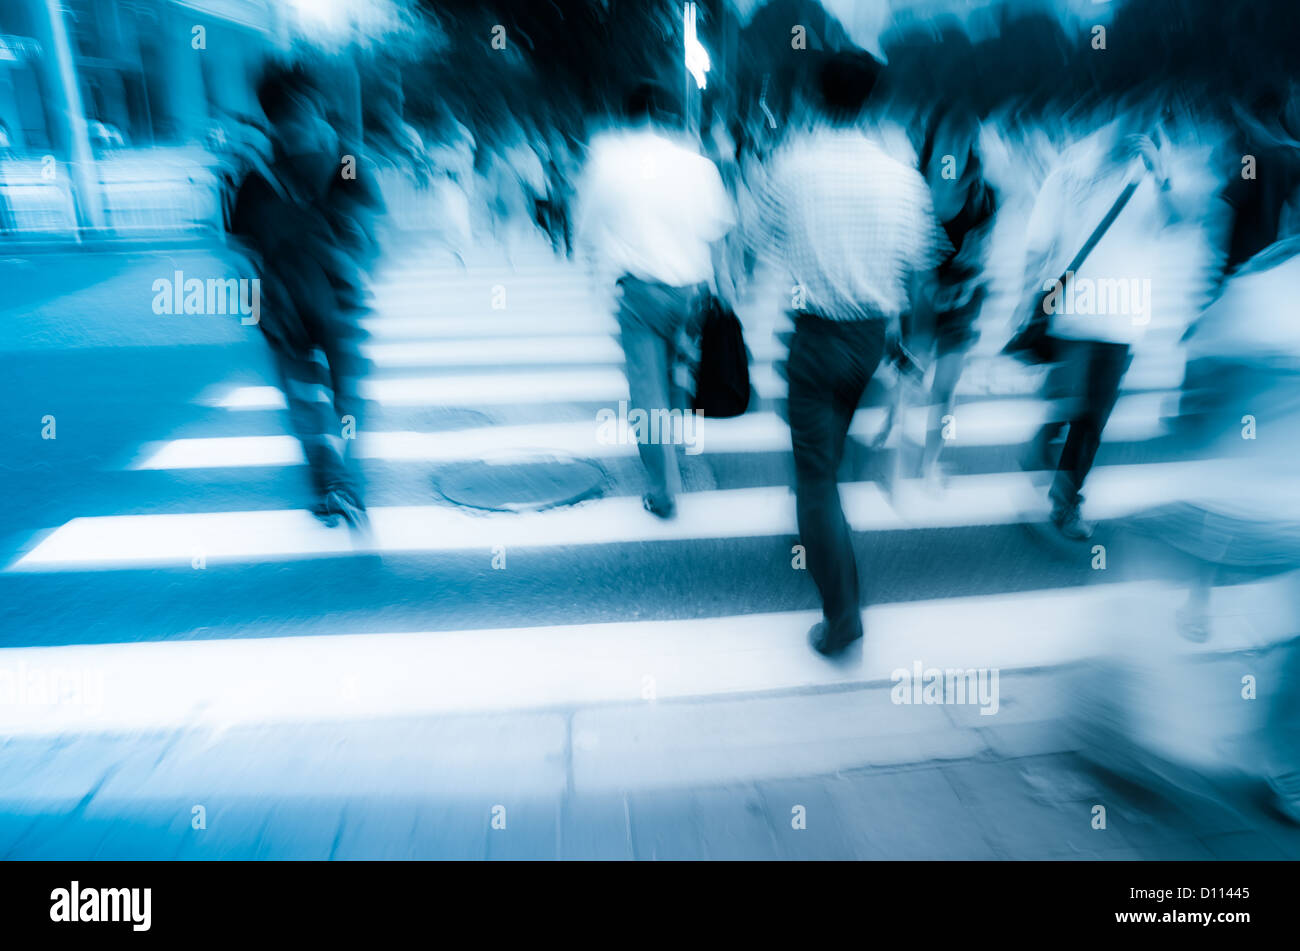 people walking on big city street, blurred motion zebra crossing abstract Stock Photo